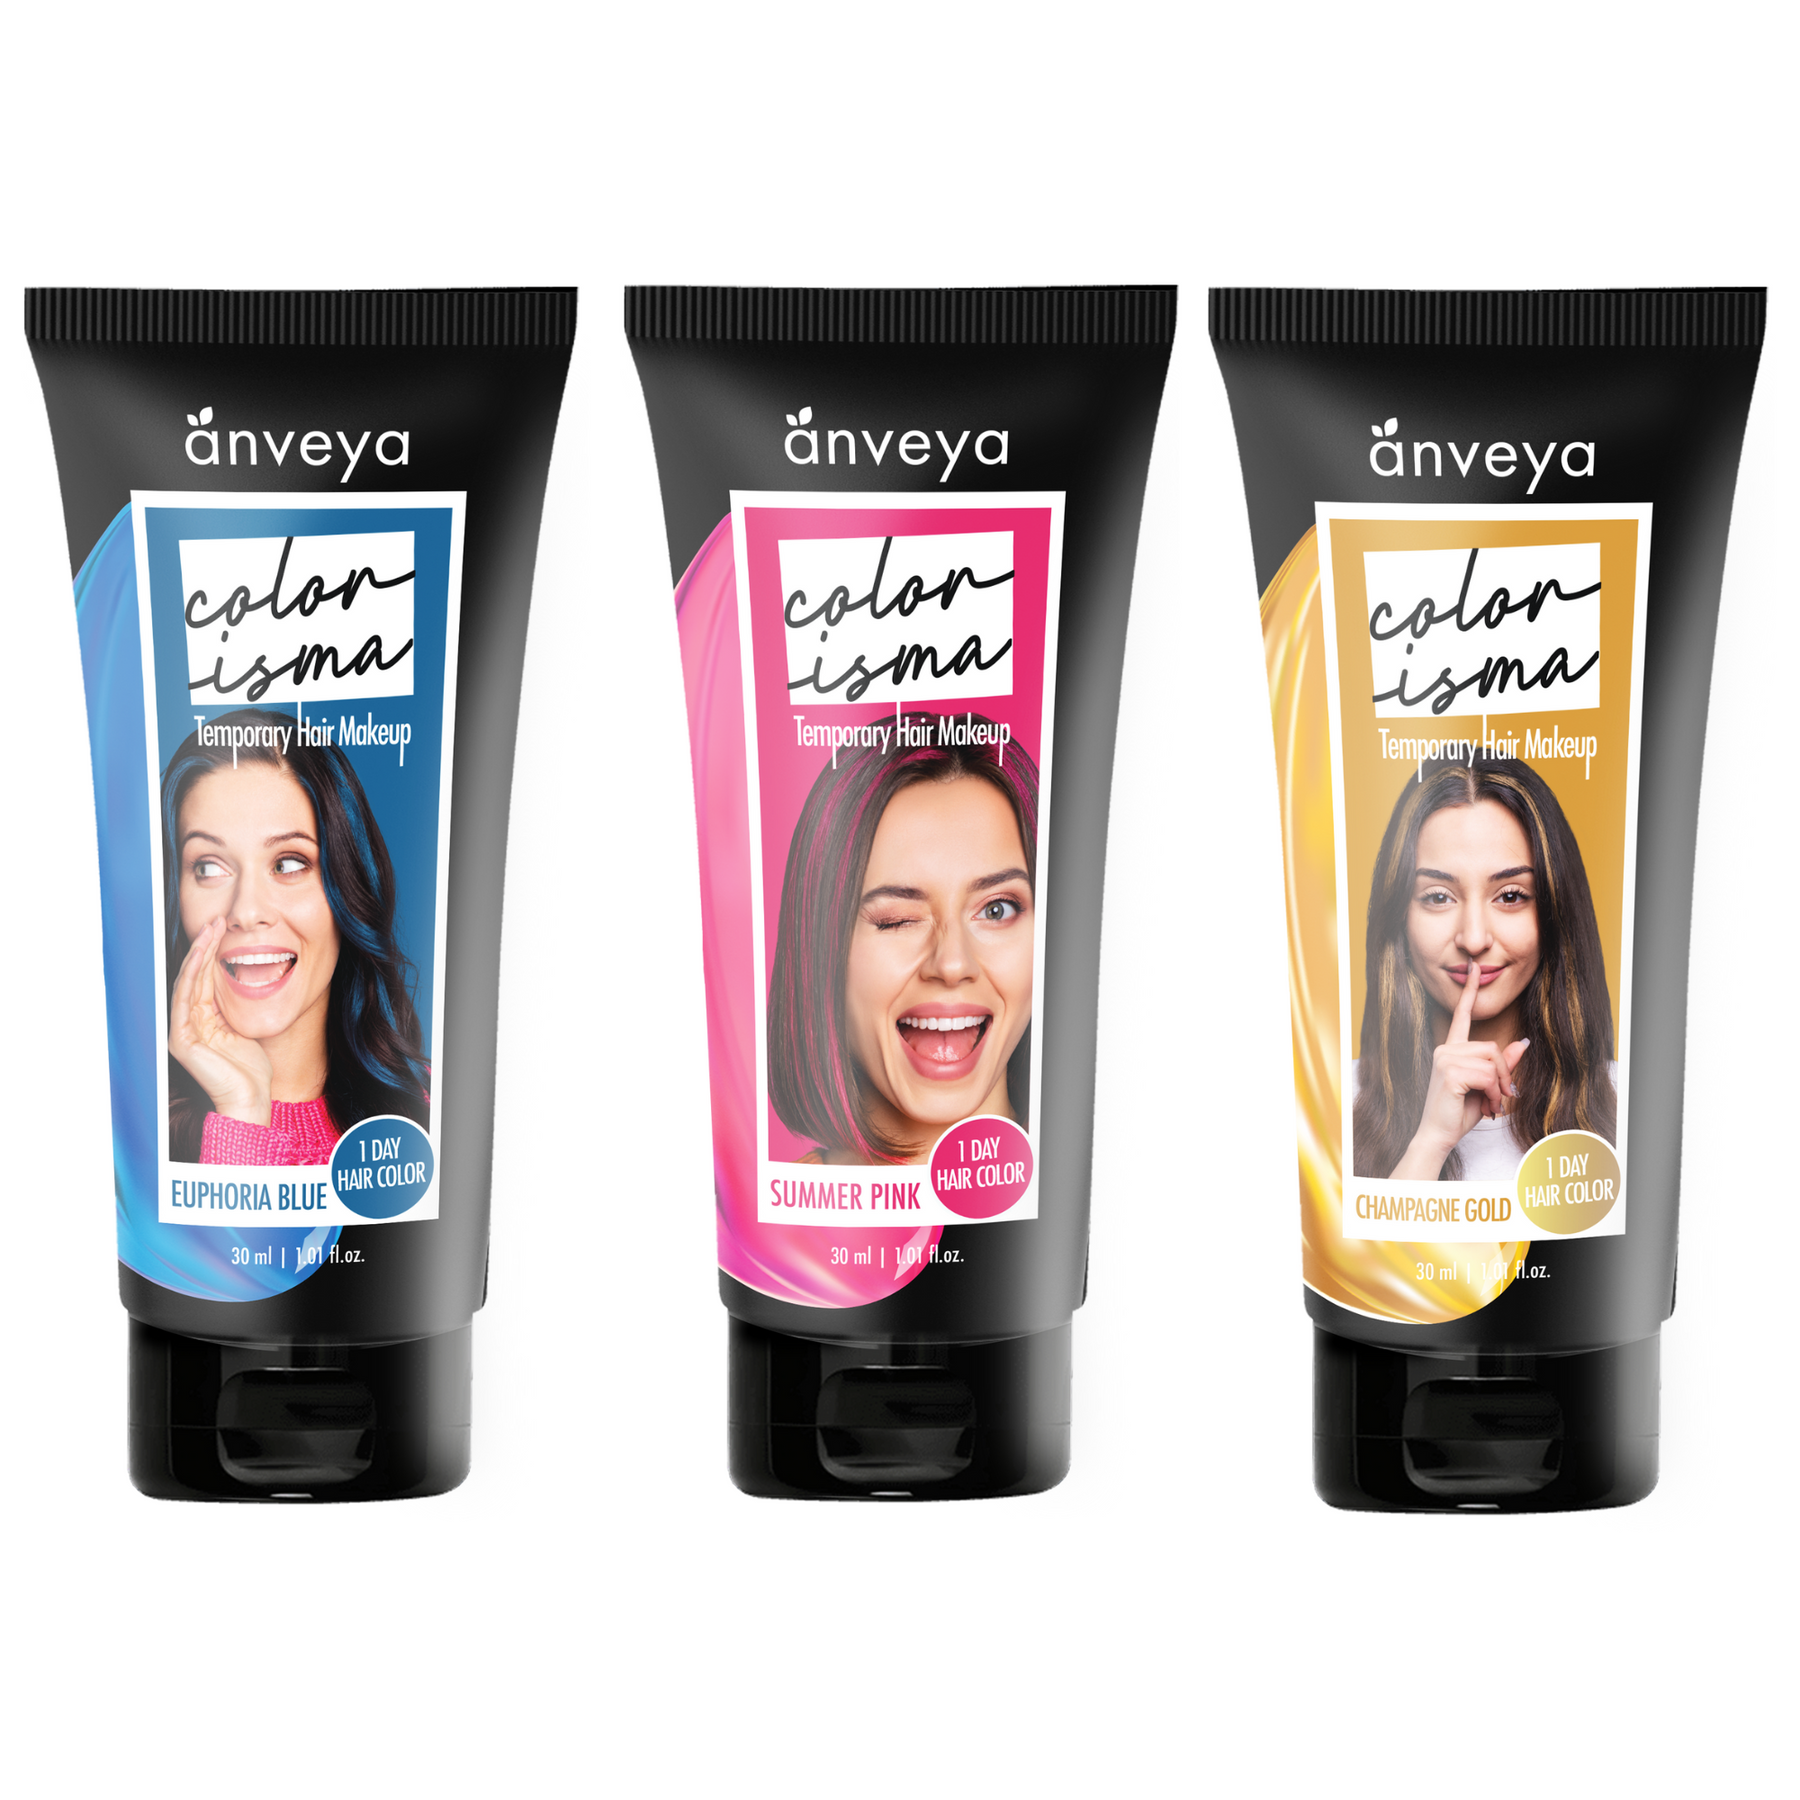 Anveya Colorisma Euphoria Blue, Summer Pink & Champagne Gold Temporary Hair Color, 30ml each